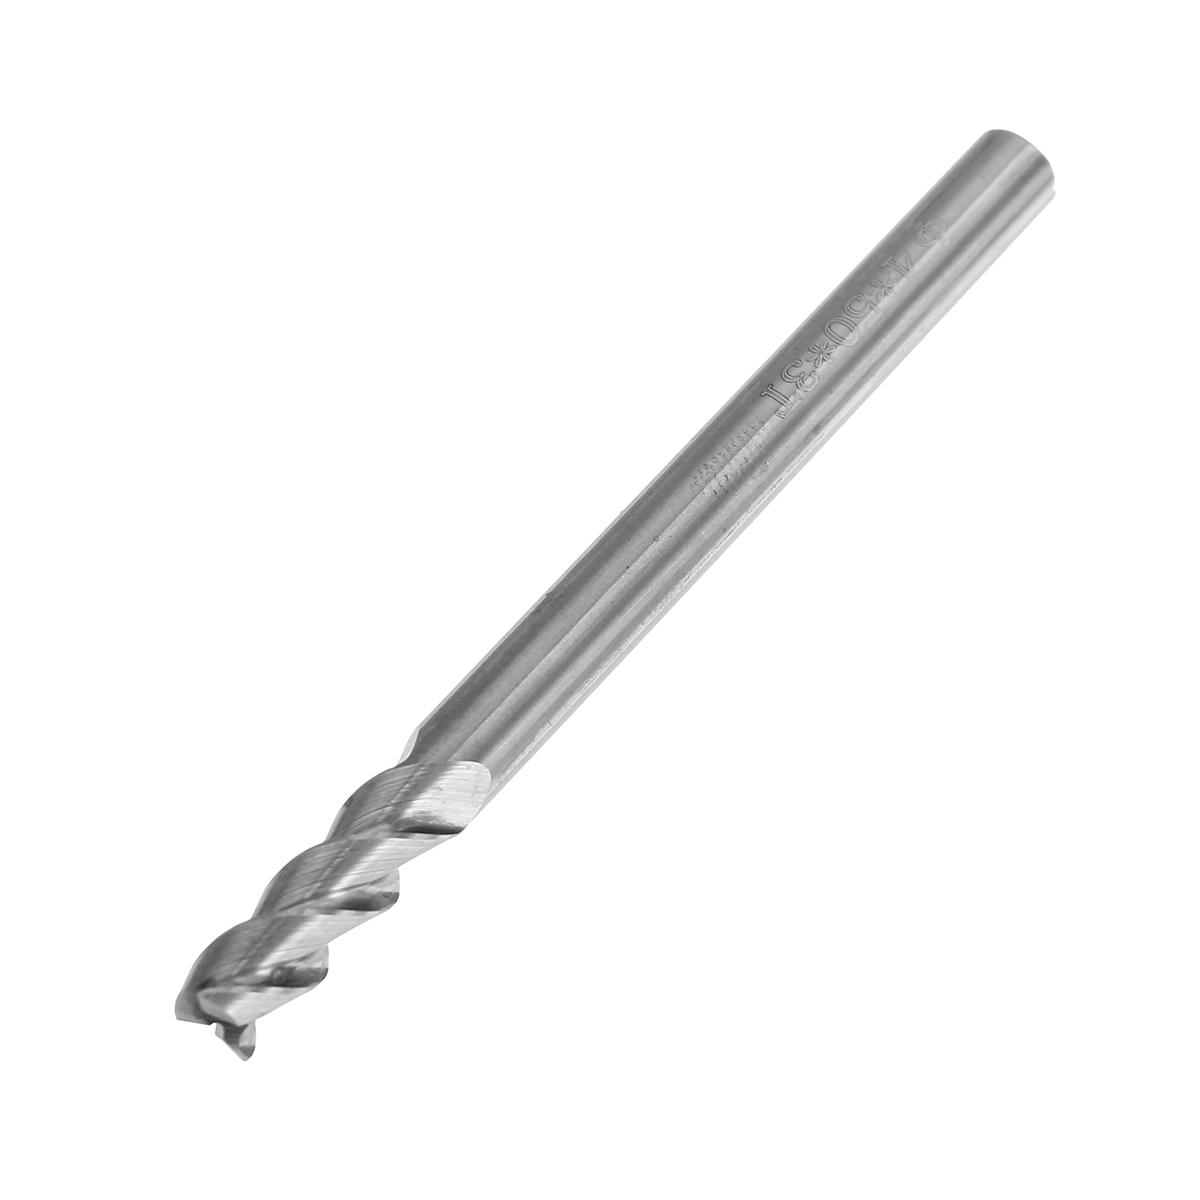 1-4mm-3-Flutes-End-Mill-Cutter-11522534mm-HRC55-Tungsten-Carbide-CNC-Milling-Tool-for-Aluminum-1542934-1